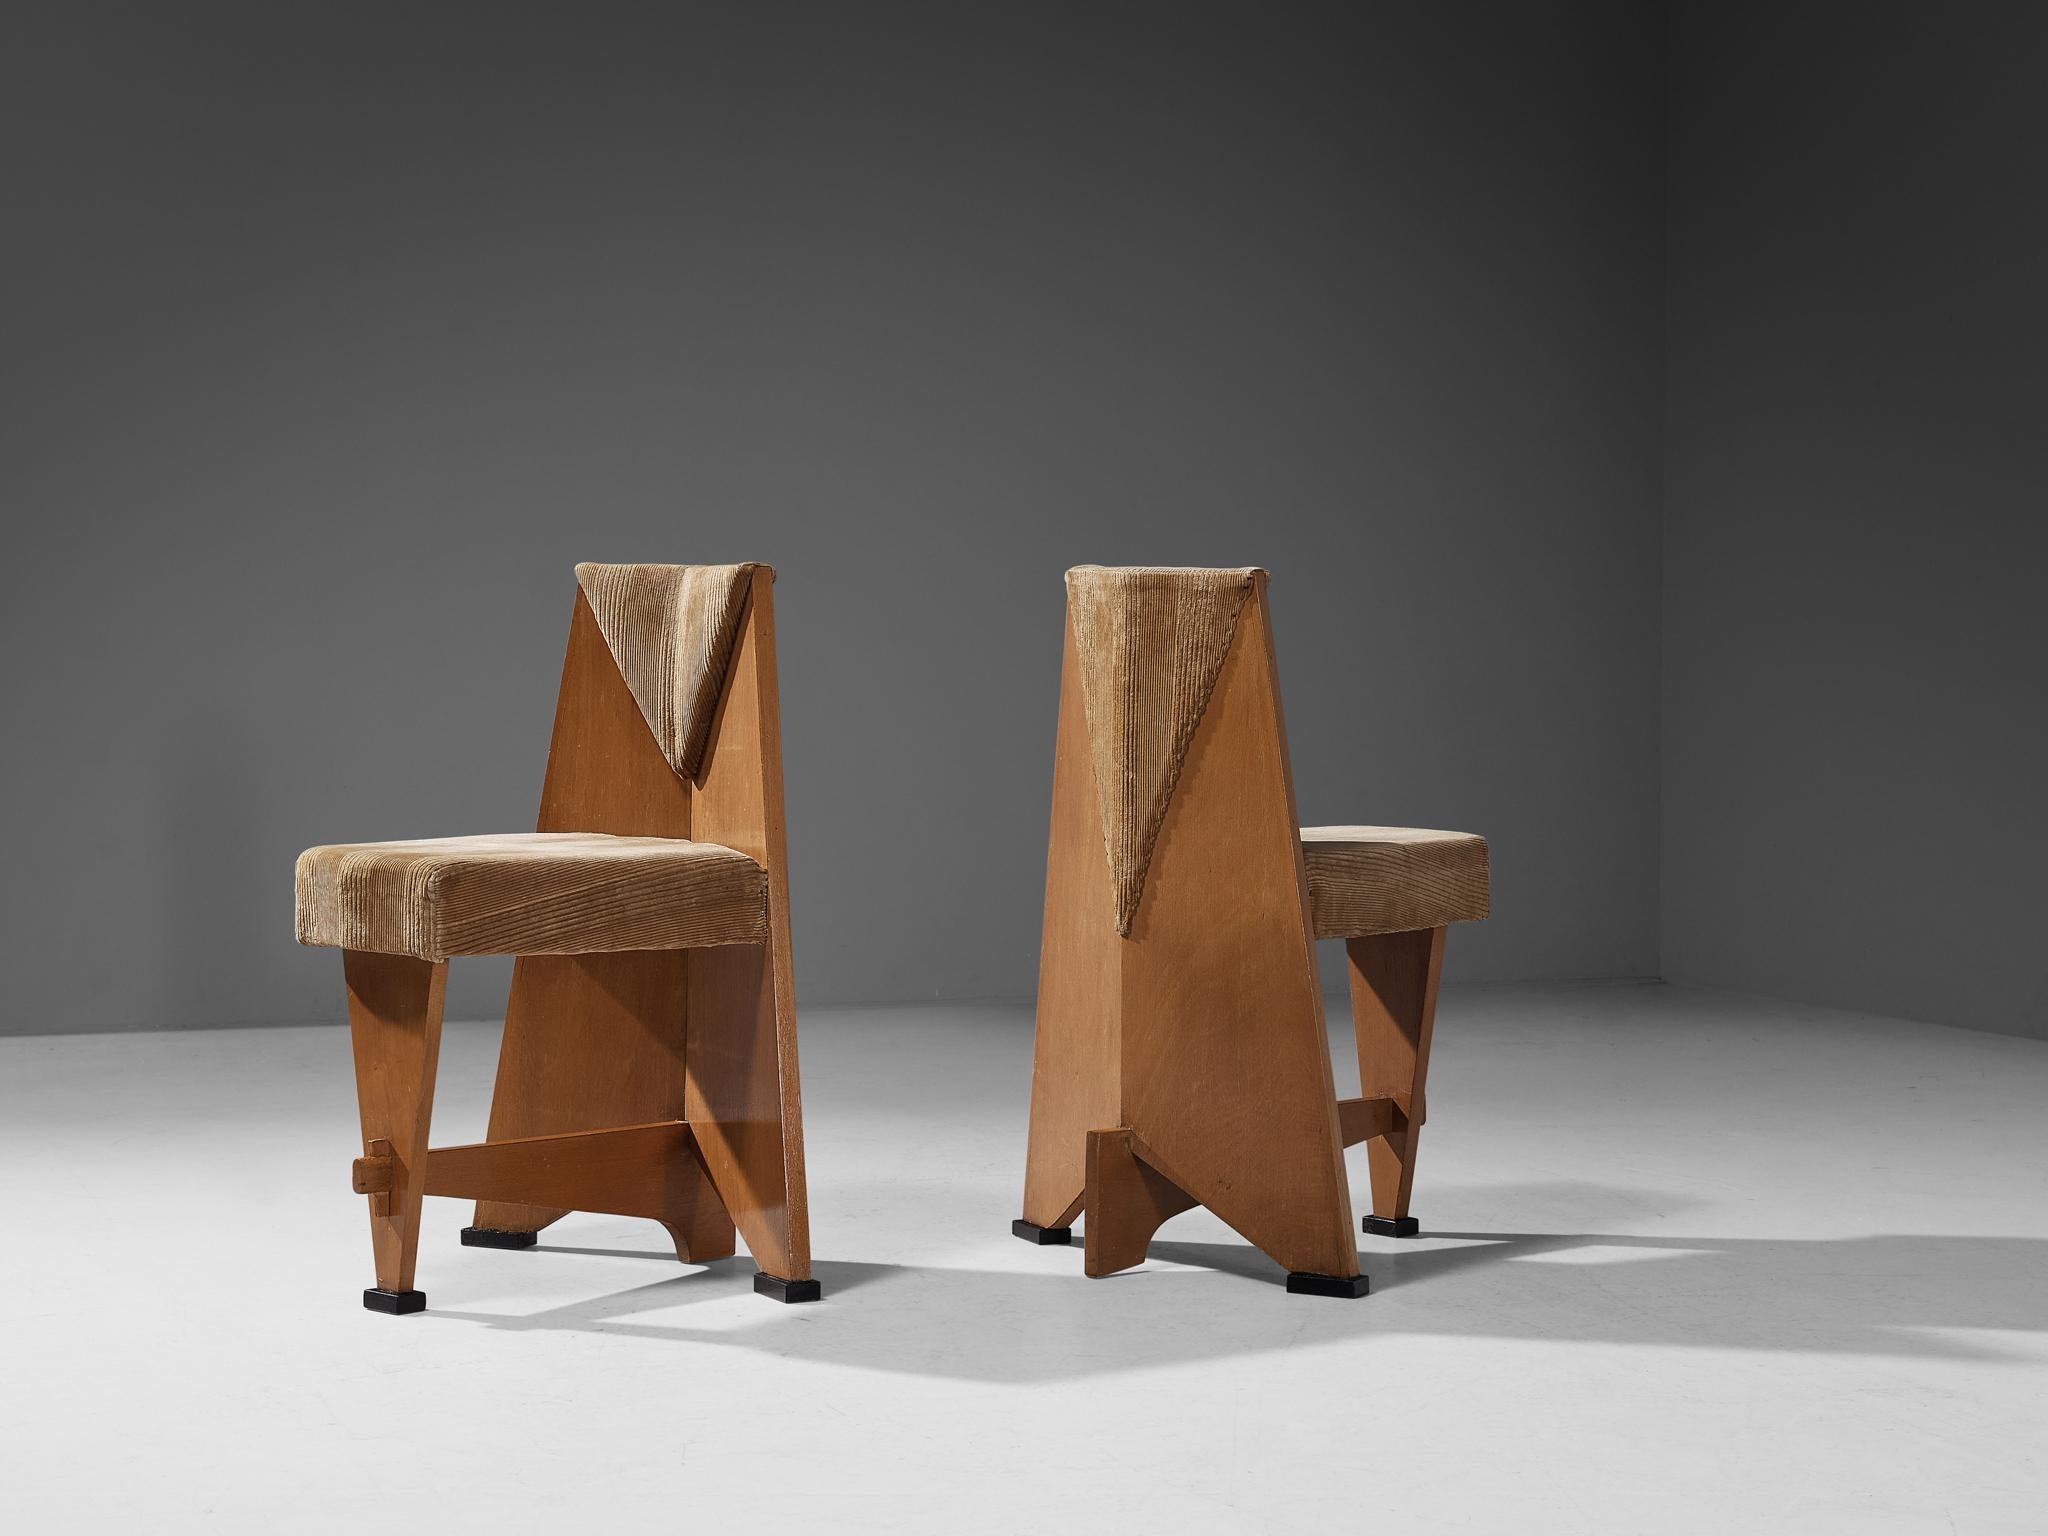 Laurens Groen for H.H. de Klerk & Zoonen, side chairs, birch, velvet upholstery, Alkmaar, The Netherlands, ca. 1928 

These chairs by Dutch designer Laurens Groen have a striking, well-documented provenance. In the style of the so-called Amsterdam